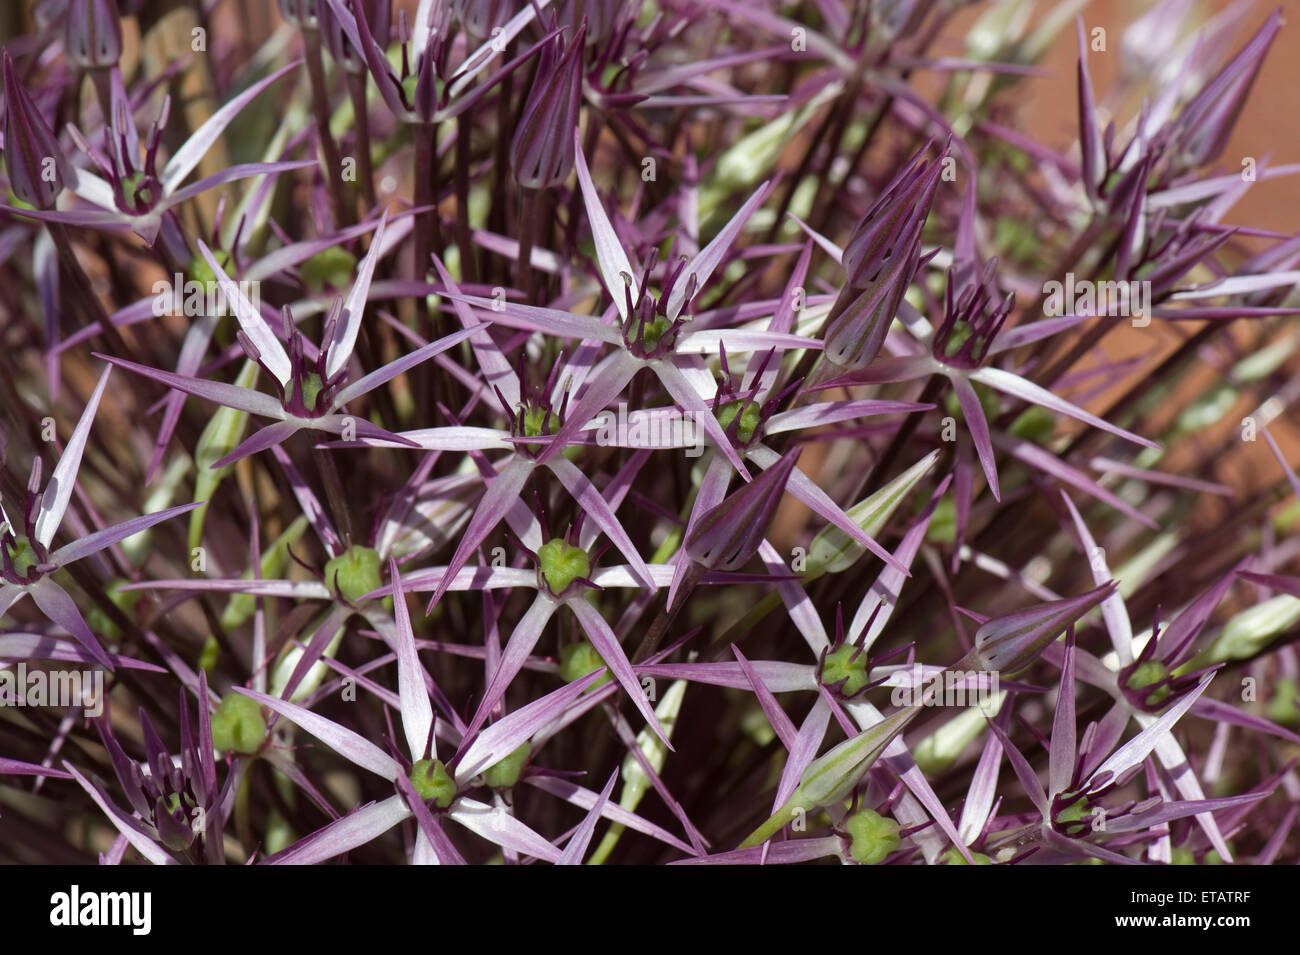 Star shaped flowers of Allium cristophii or star of Persia, purple lilac irridescent florets Stock Photo